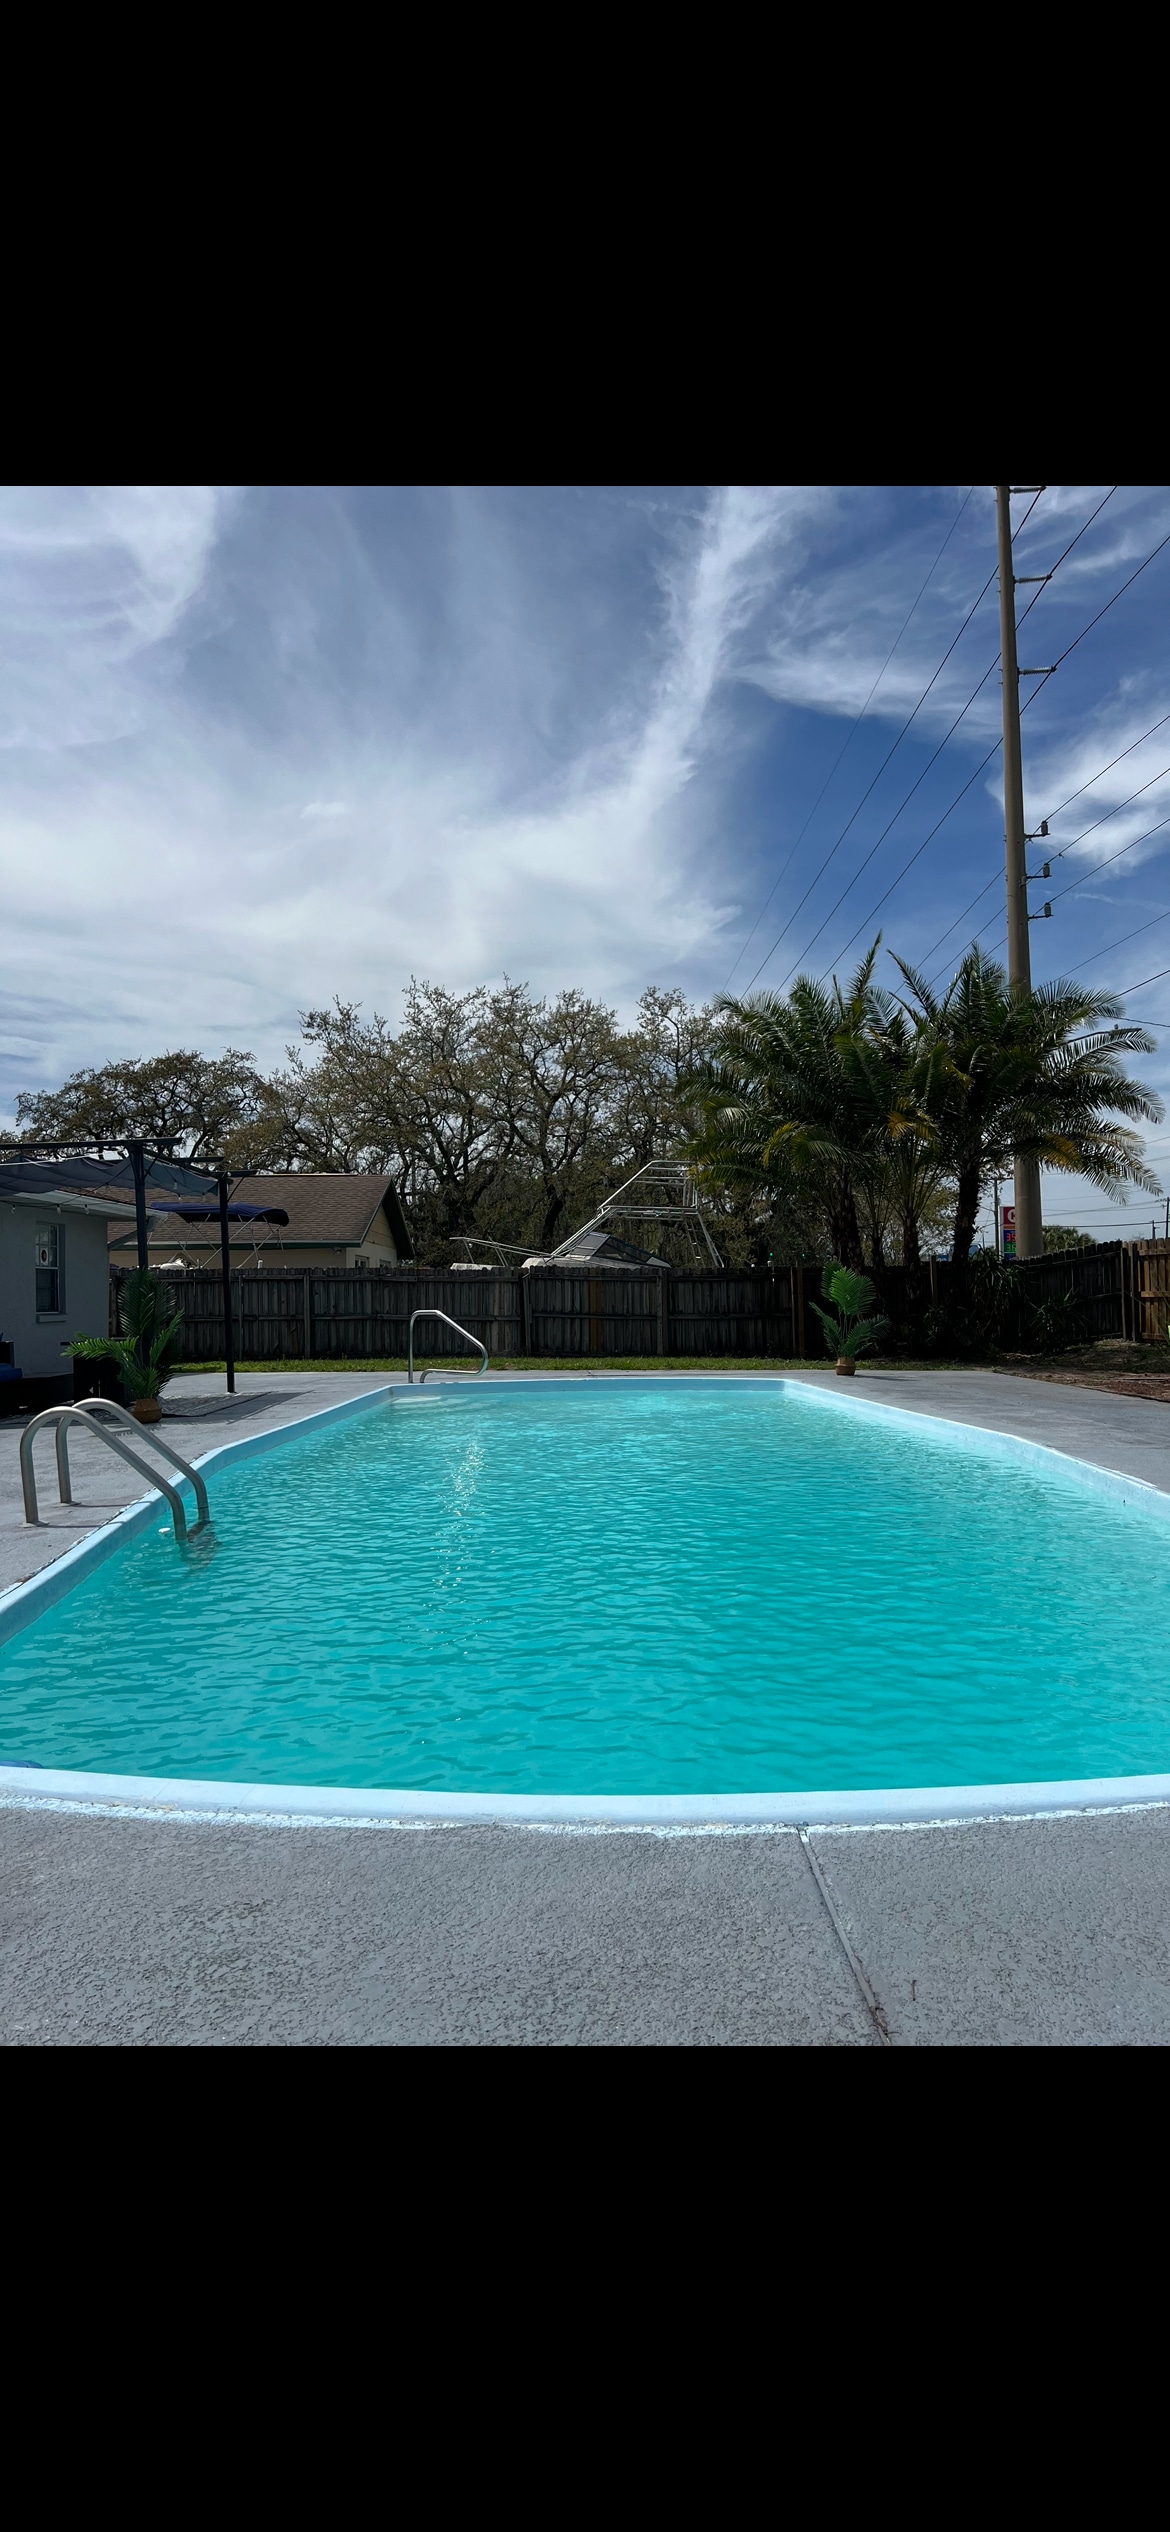 4Bdrm POOL HOME close to TAMPA!